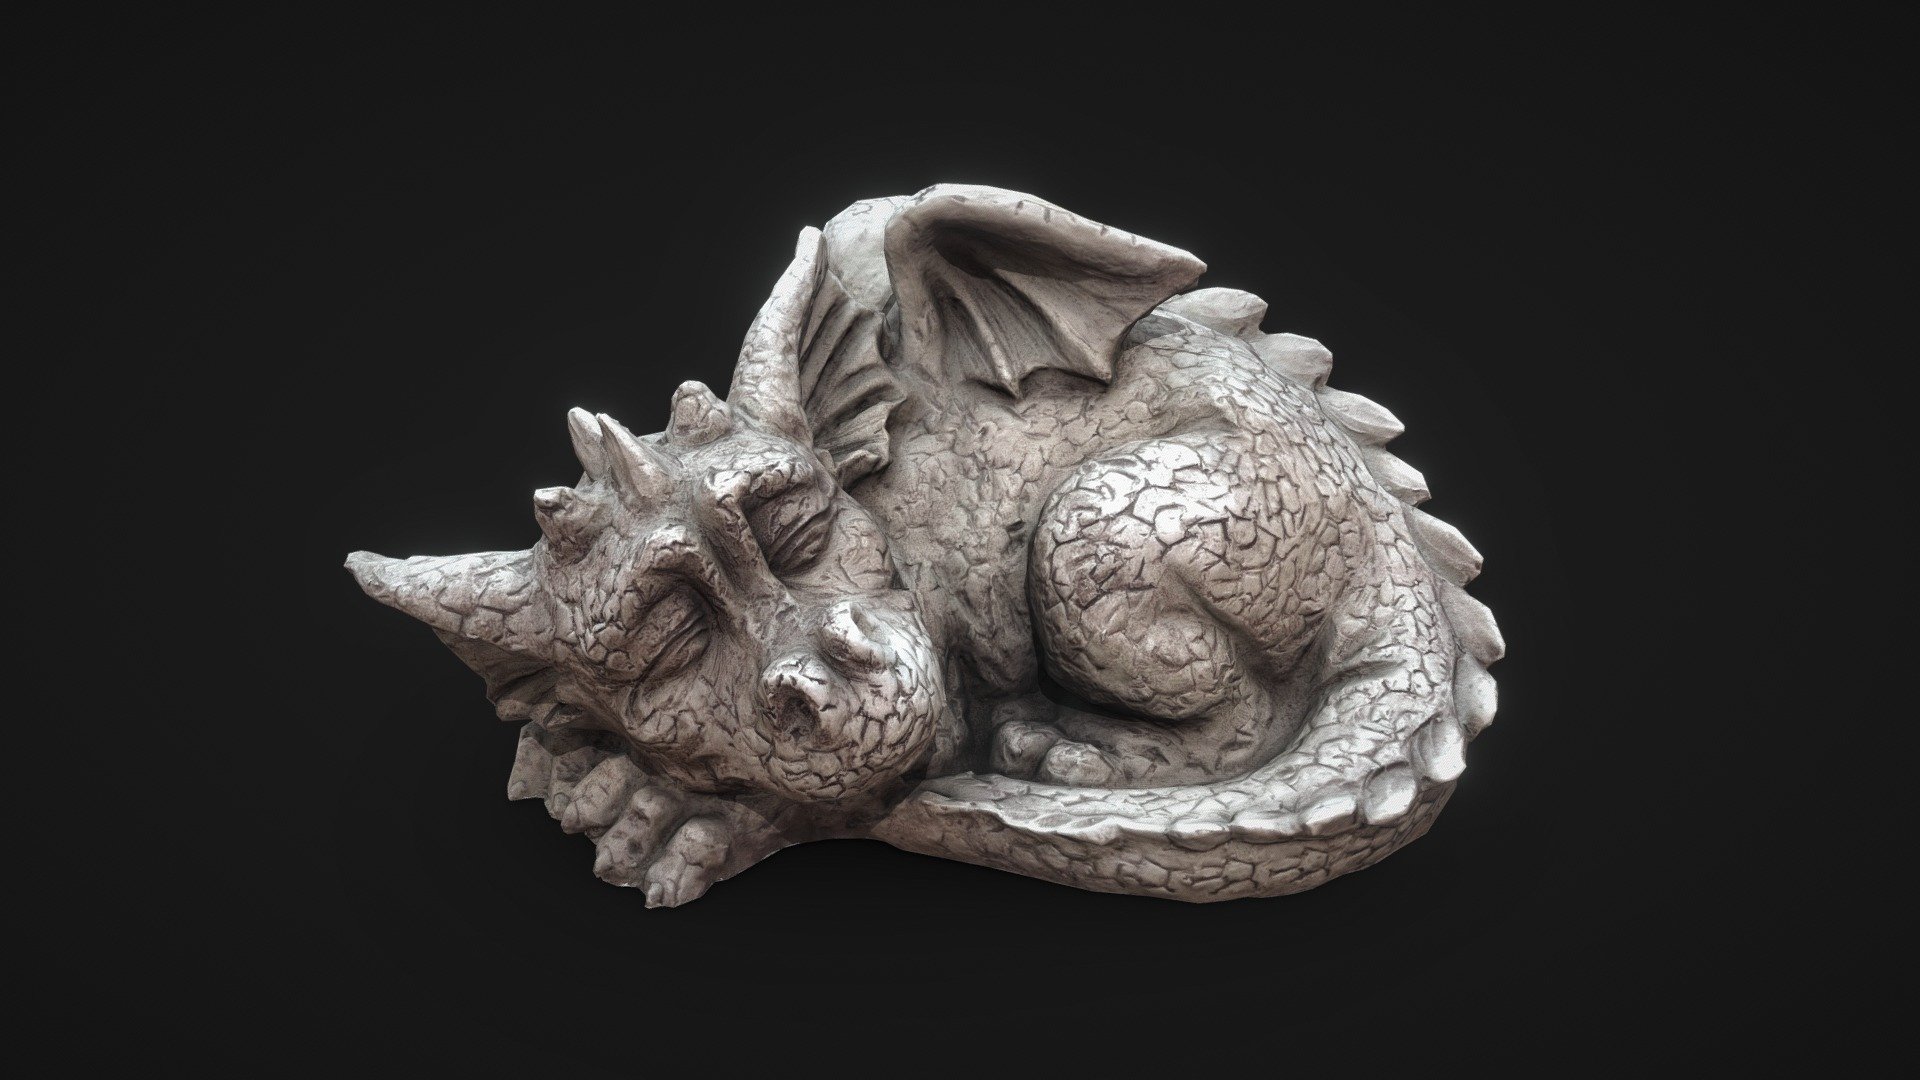 Photo scanned Plaster dragon that fits perfectly into any interior.

Technical specifications:

Close-up scan model 

Optimized model

non-overlapping UV map

ready for animation

PBR textures 2K resolution: Normal, Roughness, Albedo, Ambient Occlusion maps

Download package includes FBX, which are applicable for 3ds Max, Maya, Unreal Engine, Unity, Blender.

Enjoy! - Dragon souvenir photogrammetry - Buy Royalty Free 3D model by SubVis 3d model